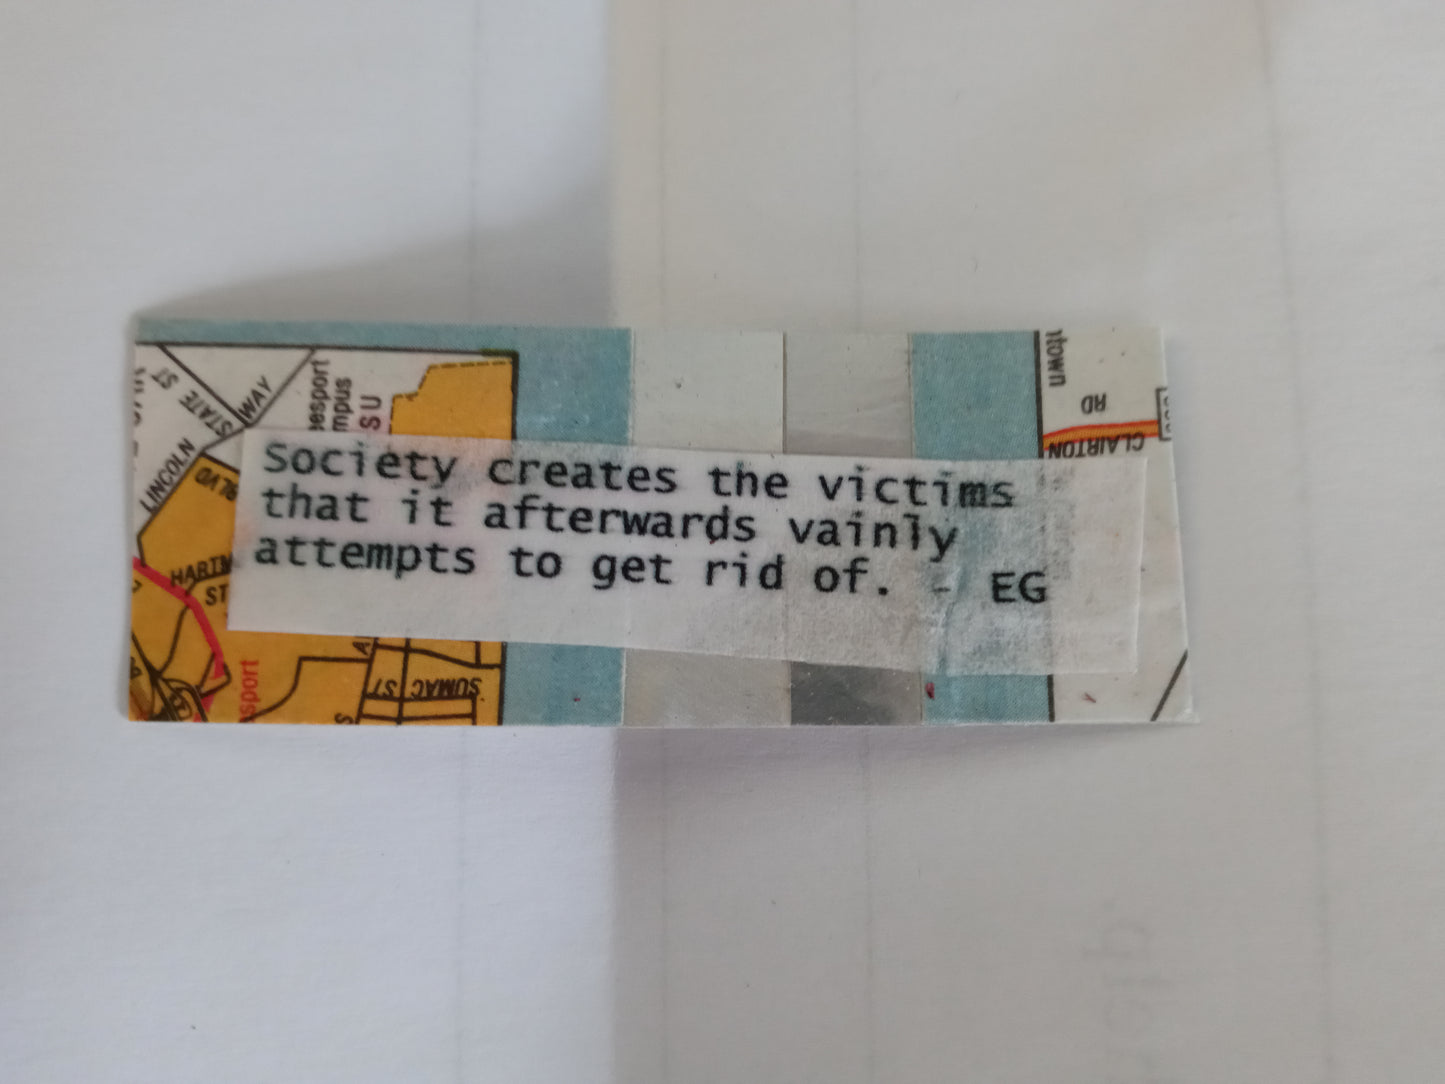 A small, rectangular handmade sticker with a map background and a quote printed on white paper that reads "Society creates the victims that it afterwards vainly attempts to get rid of. - EG"